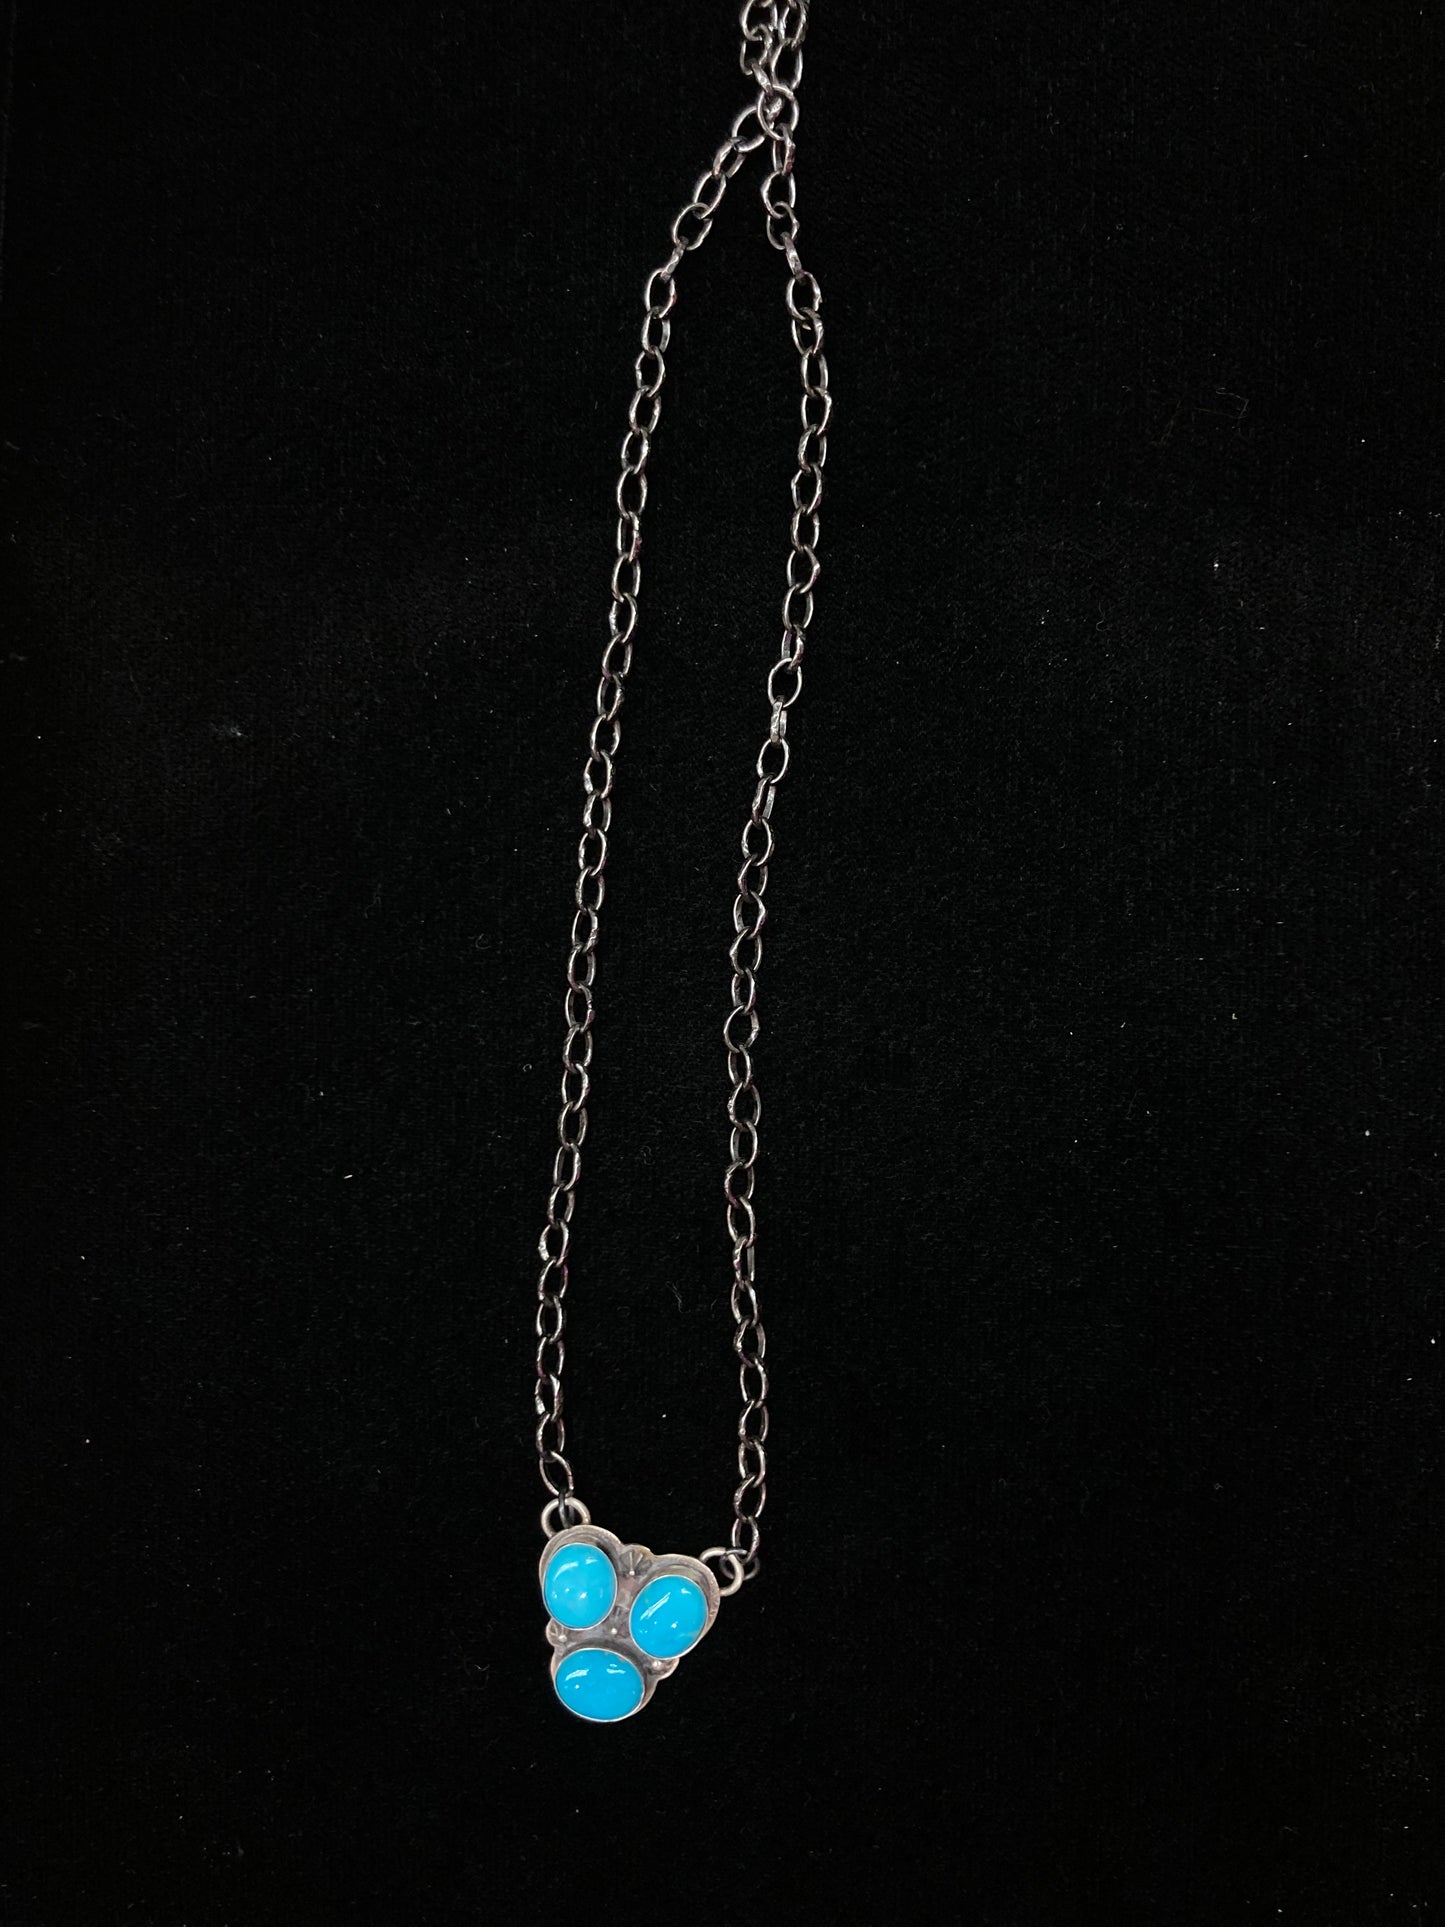 18" 3 Stone Sleeping Beauty Turquoise Necklace by Zia